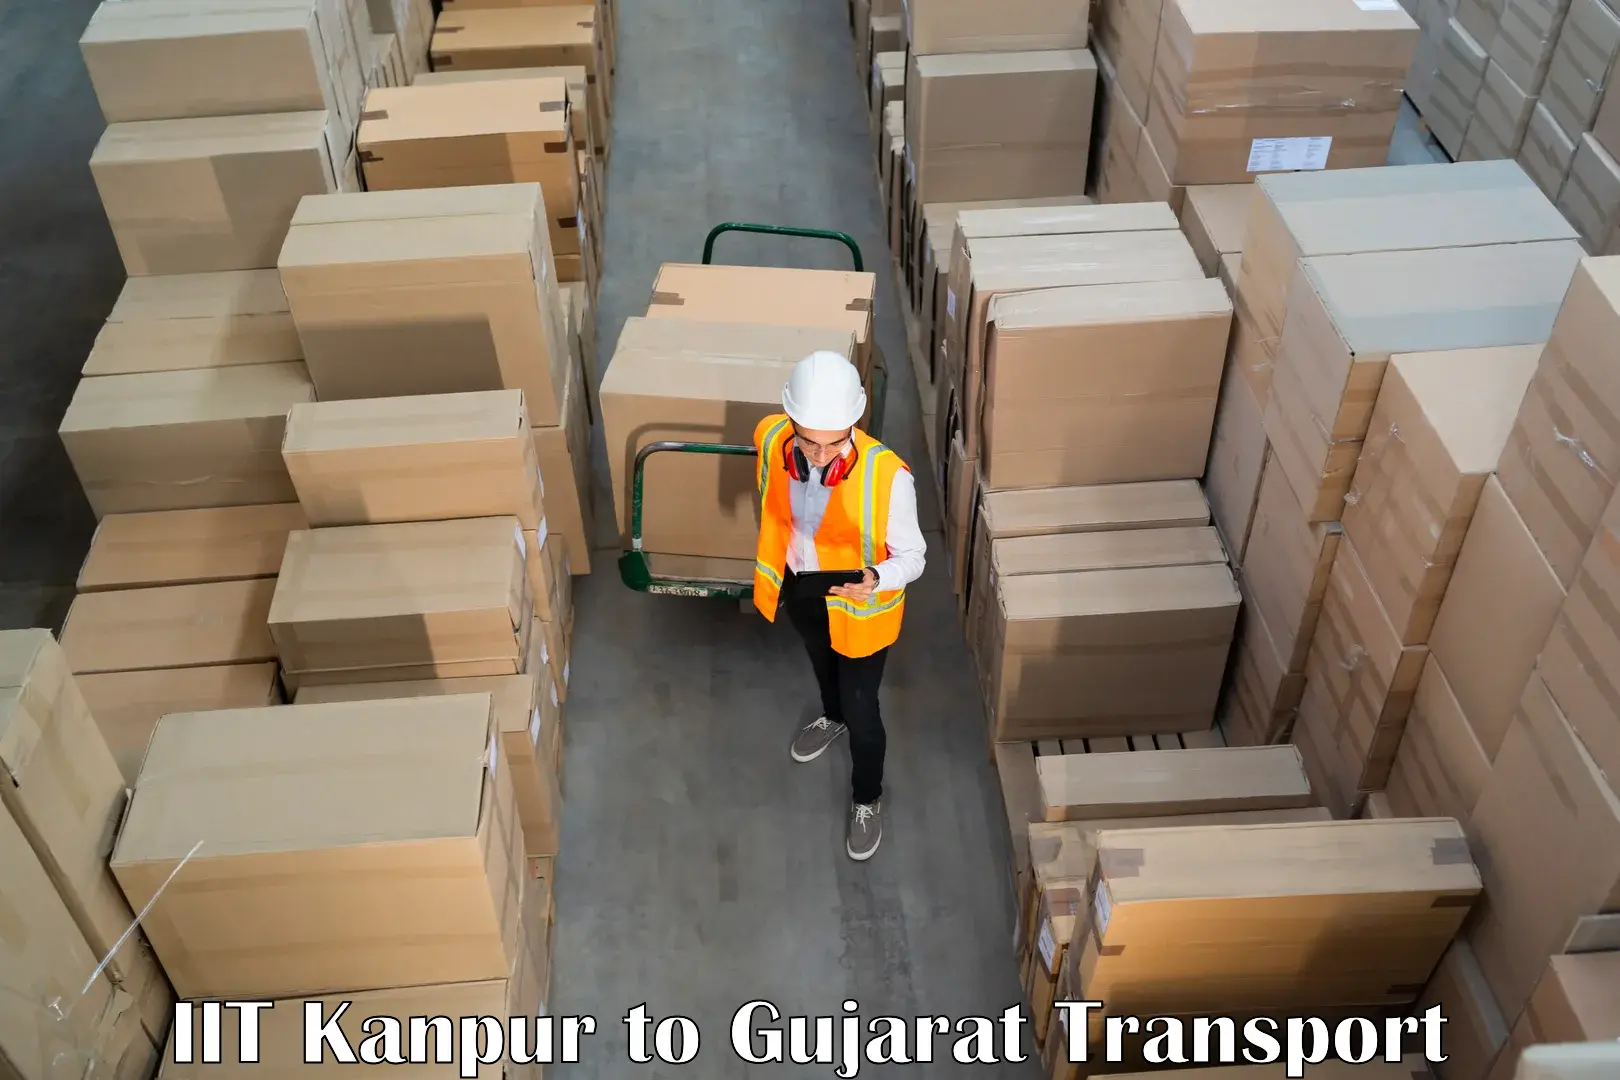 Commercial transport service IIT Kanpur to Dholera